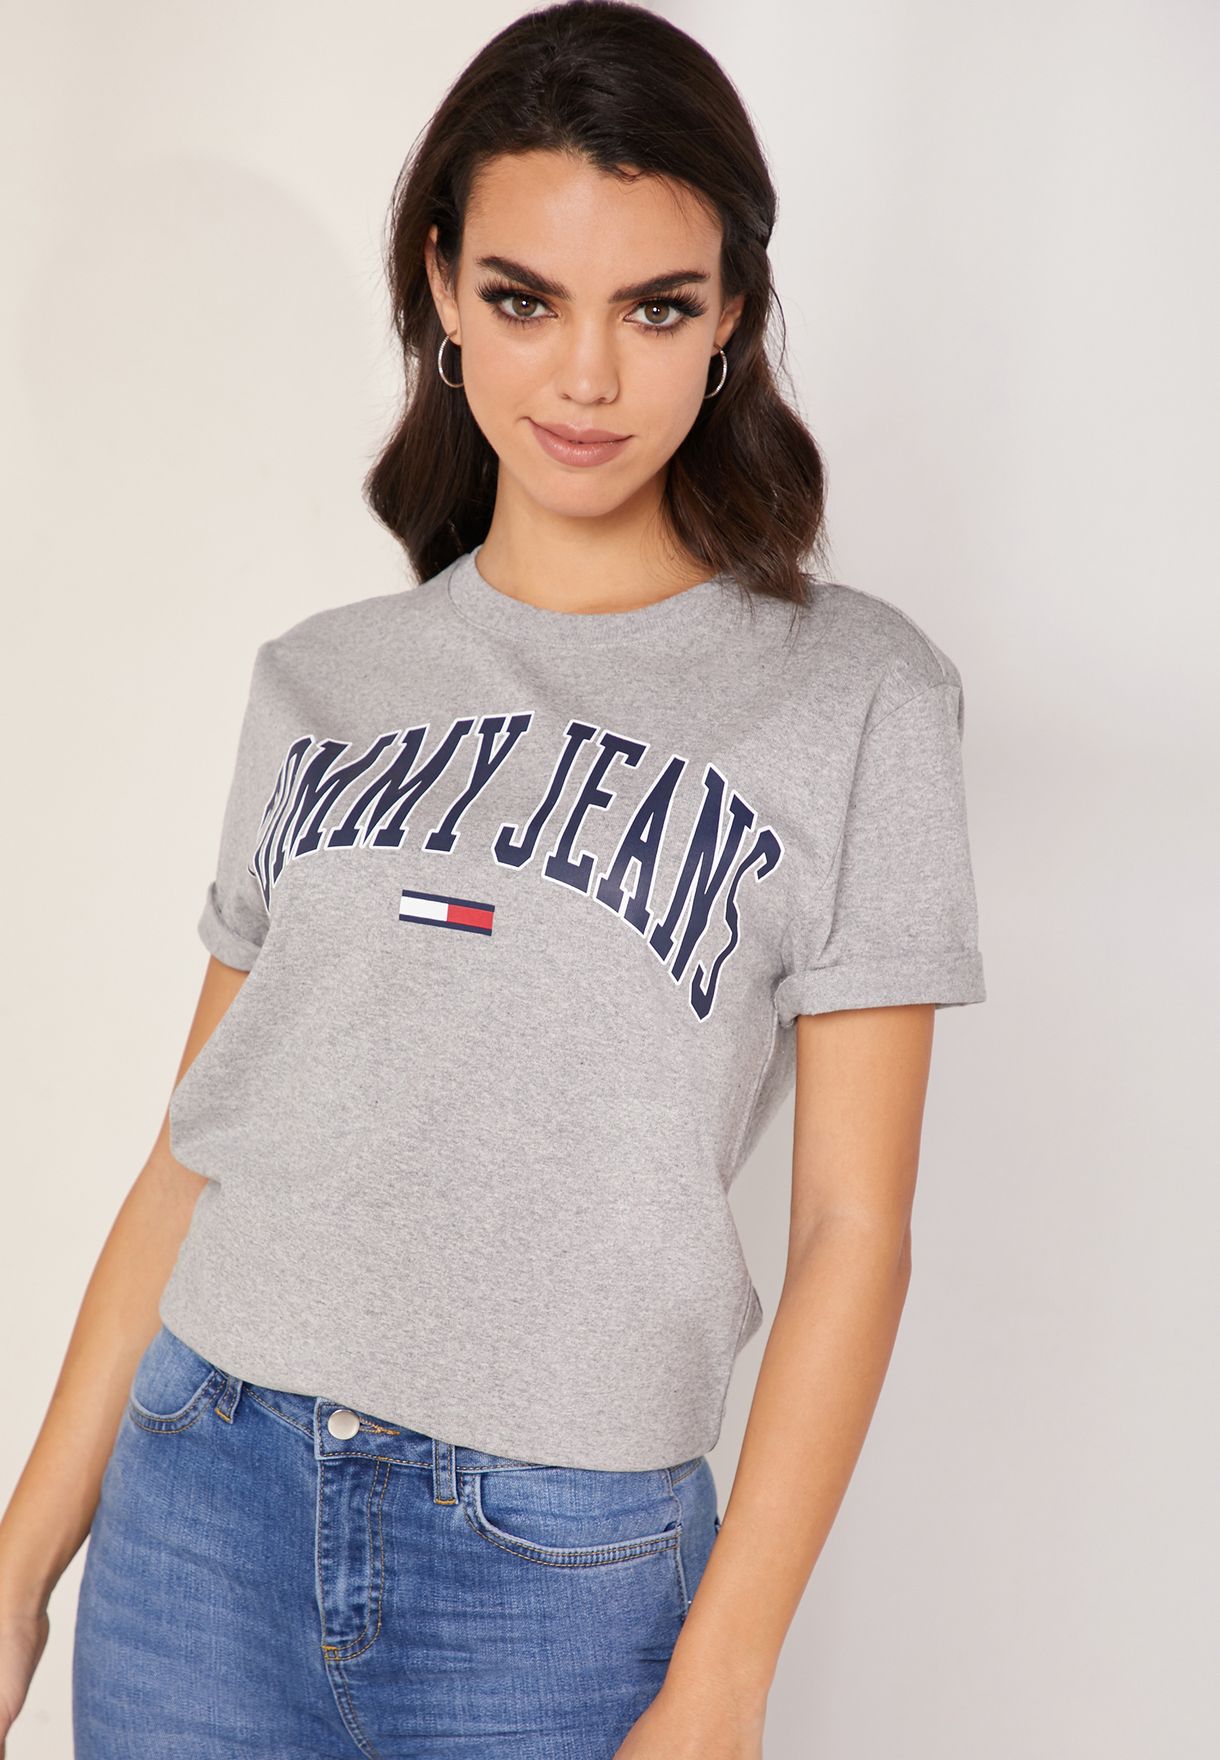 tommy jeans collegiate logo tee